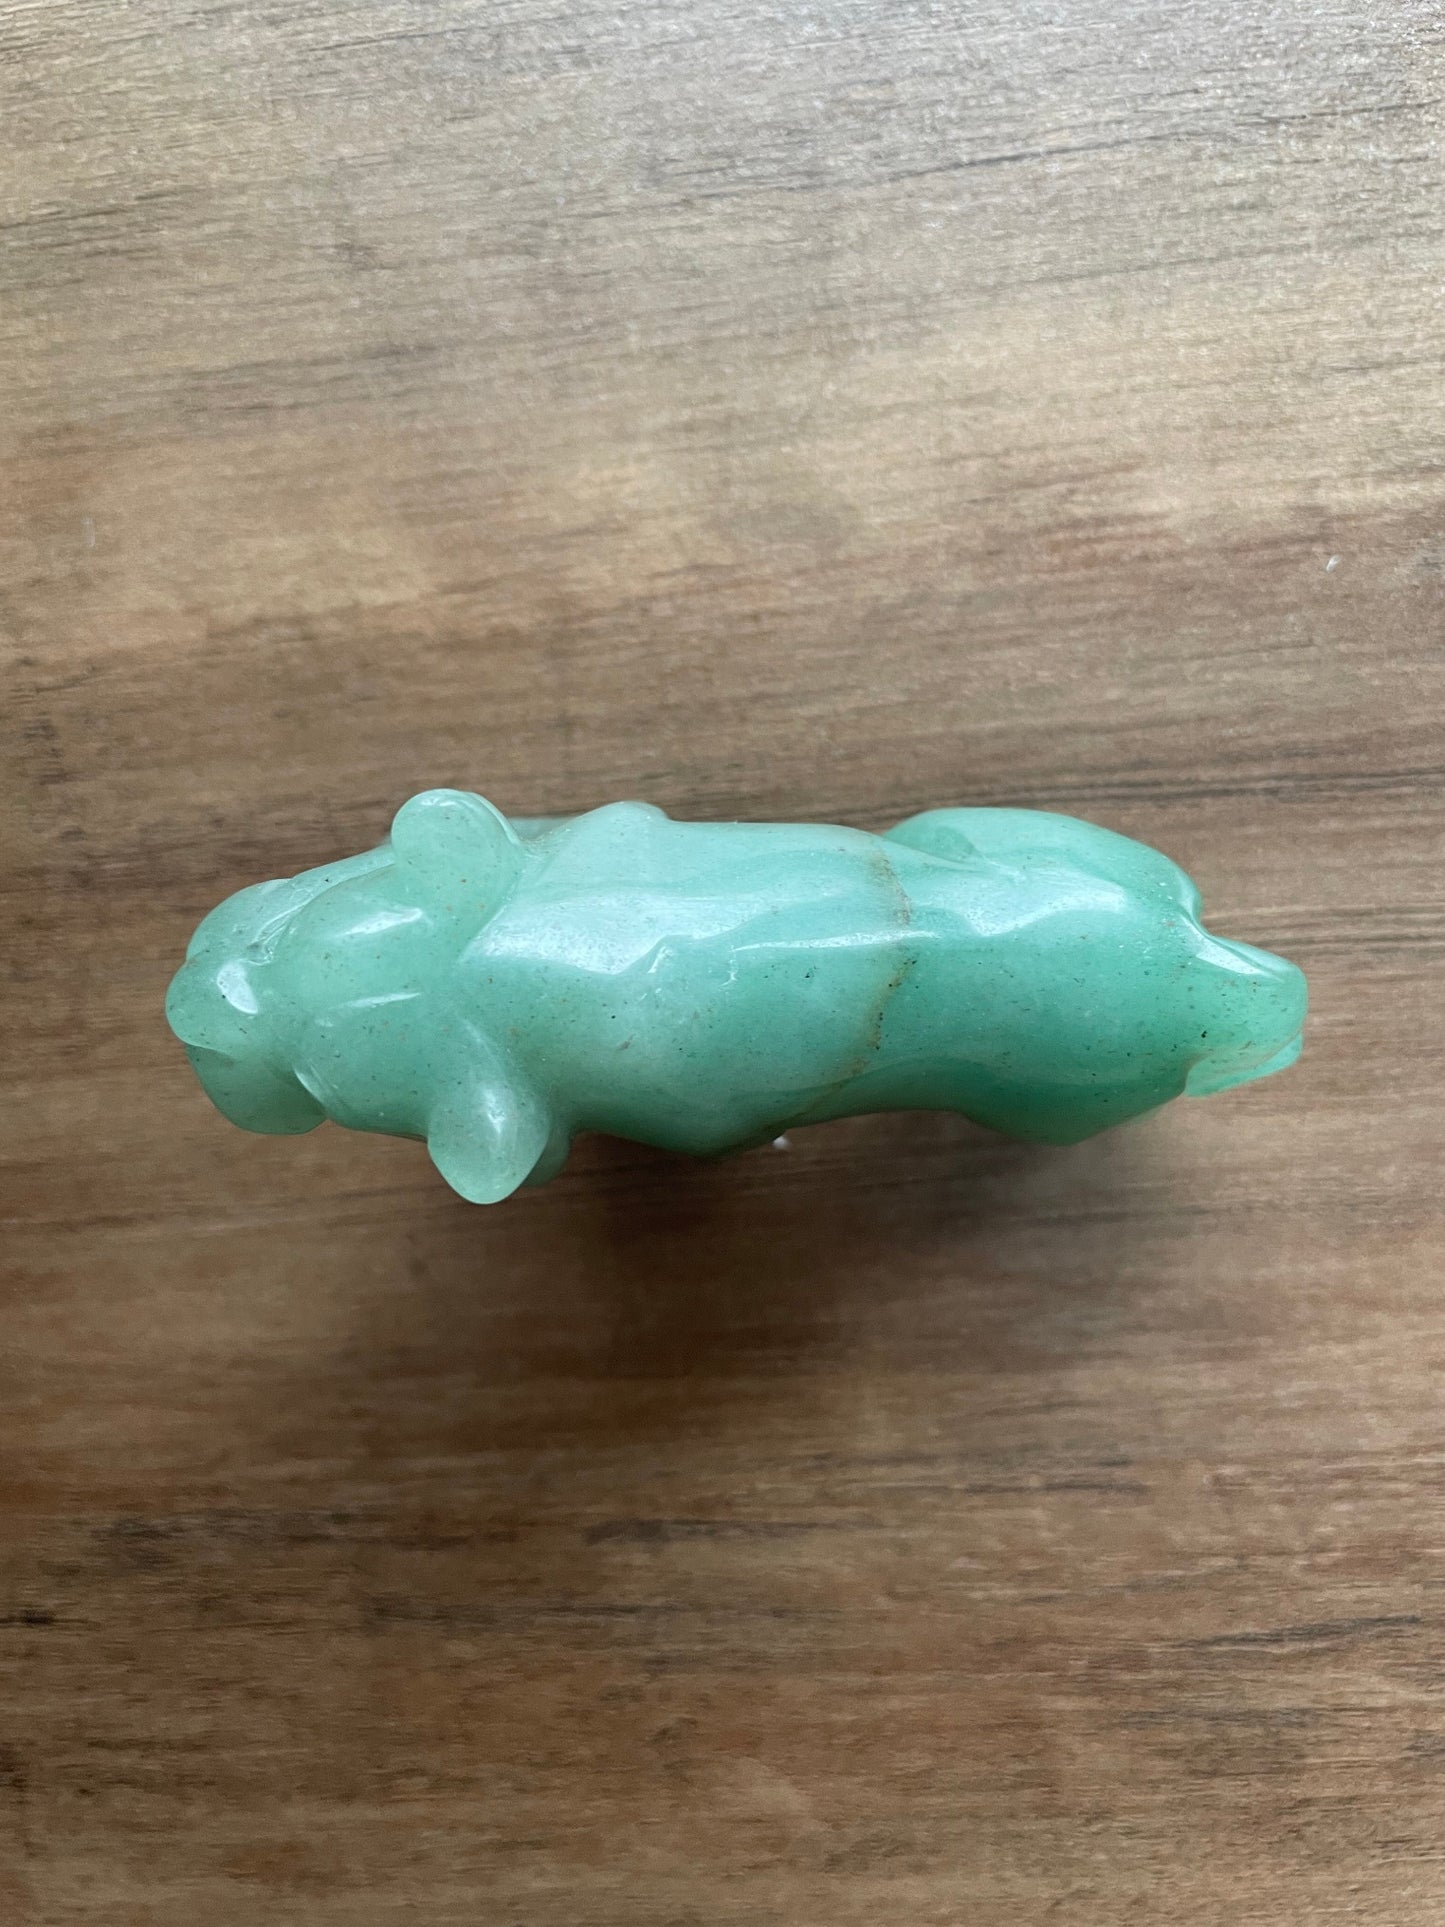 Pictured is a tiger carved out of green aventurine.